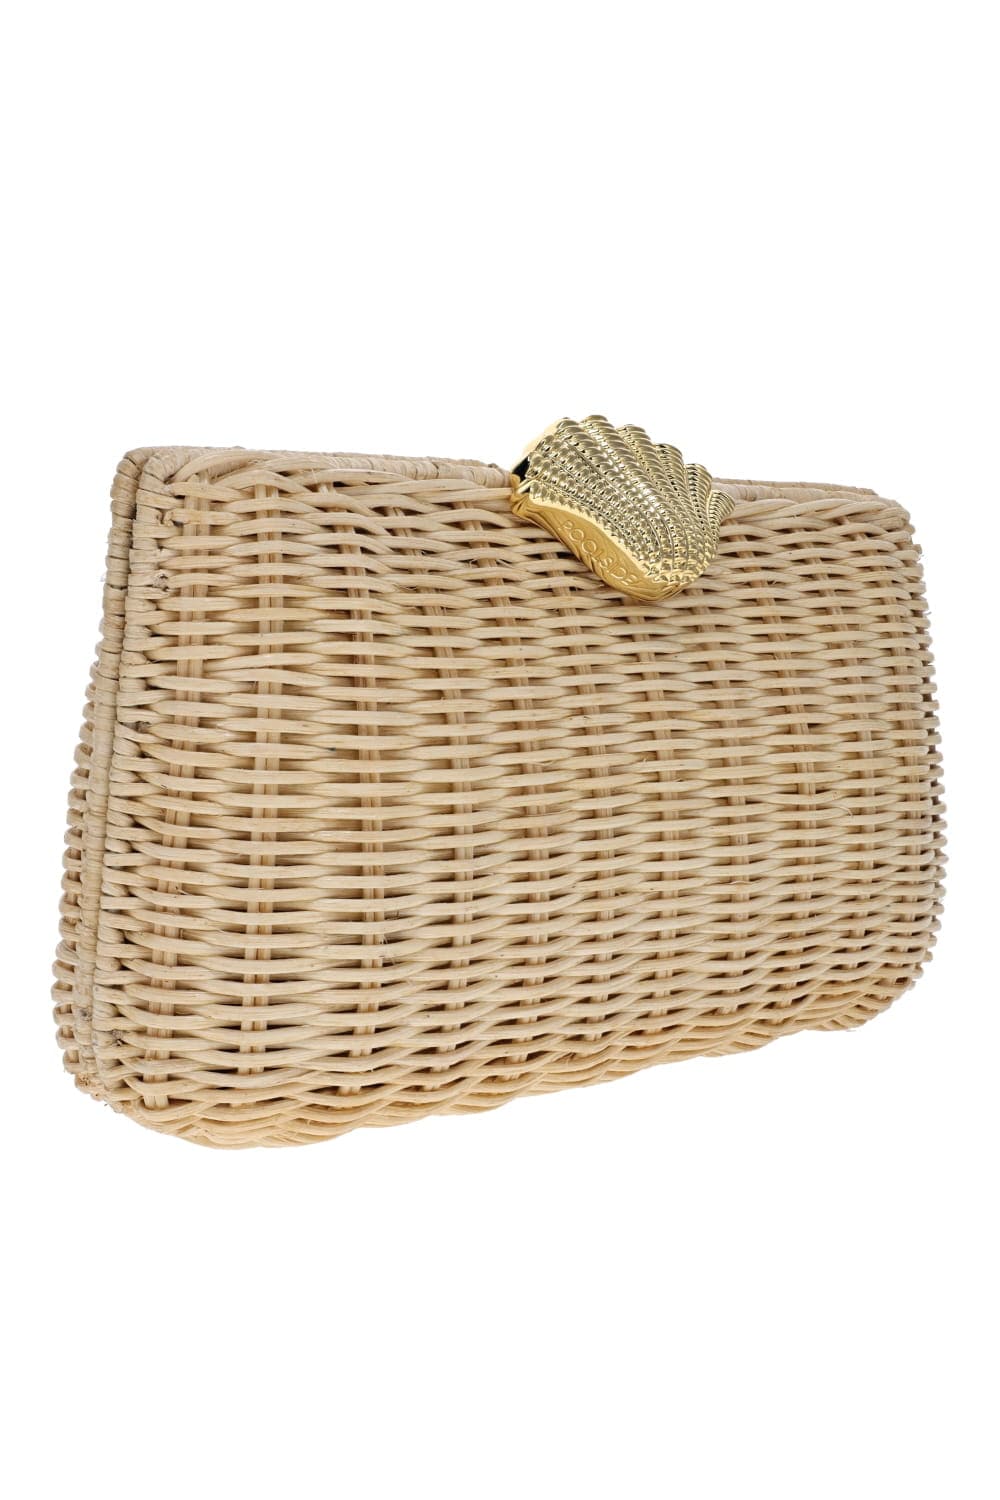 POOLSIDE The Classica Natural Straw Clutch